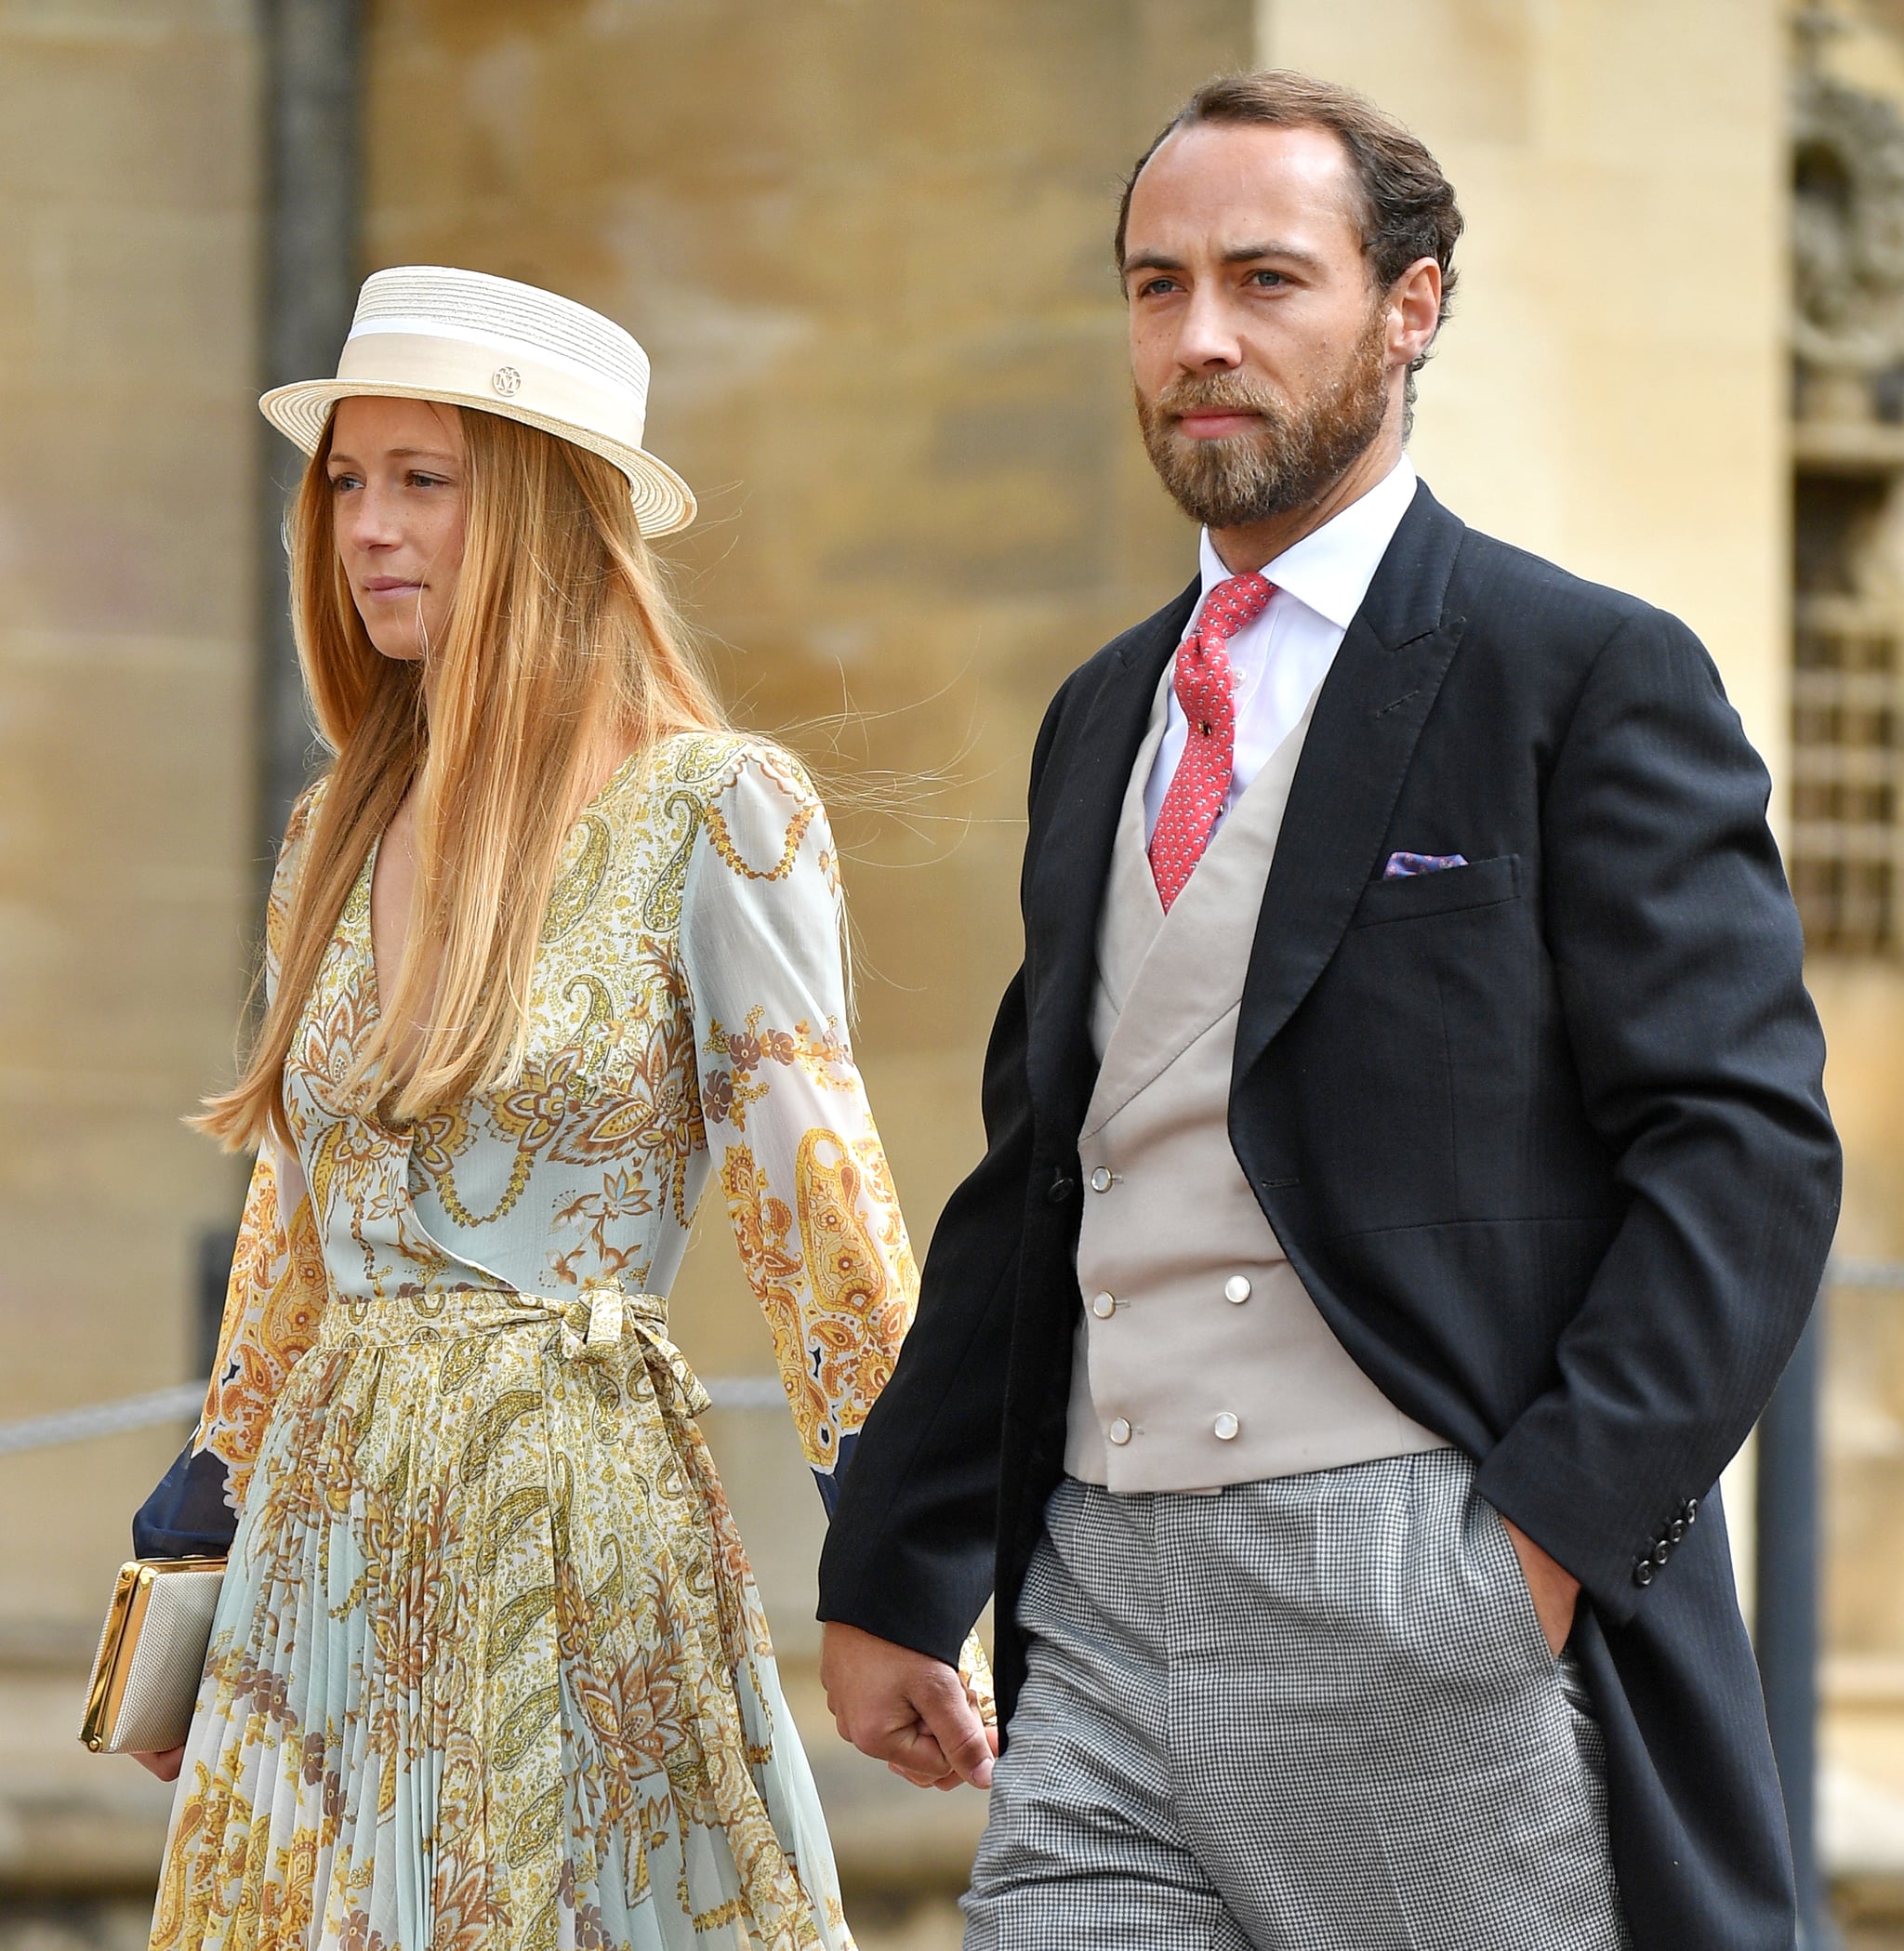 WINDSOR, UNITED KINGDOM - MAY 18: (EMBARGOED FOR PUBLICATION IN UK NEWSPAPERS UNTIL 24 HOURS AFTER CREATE DATE AND TIME) Alizee Thevenet and James Middleton attend the wedding of Lady Gabriella Windsor and Thomas Kingston at St George